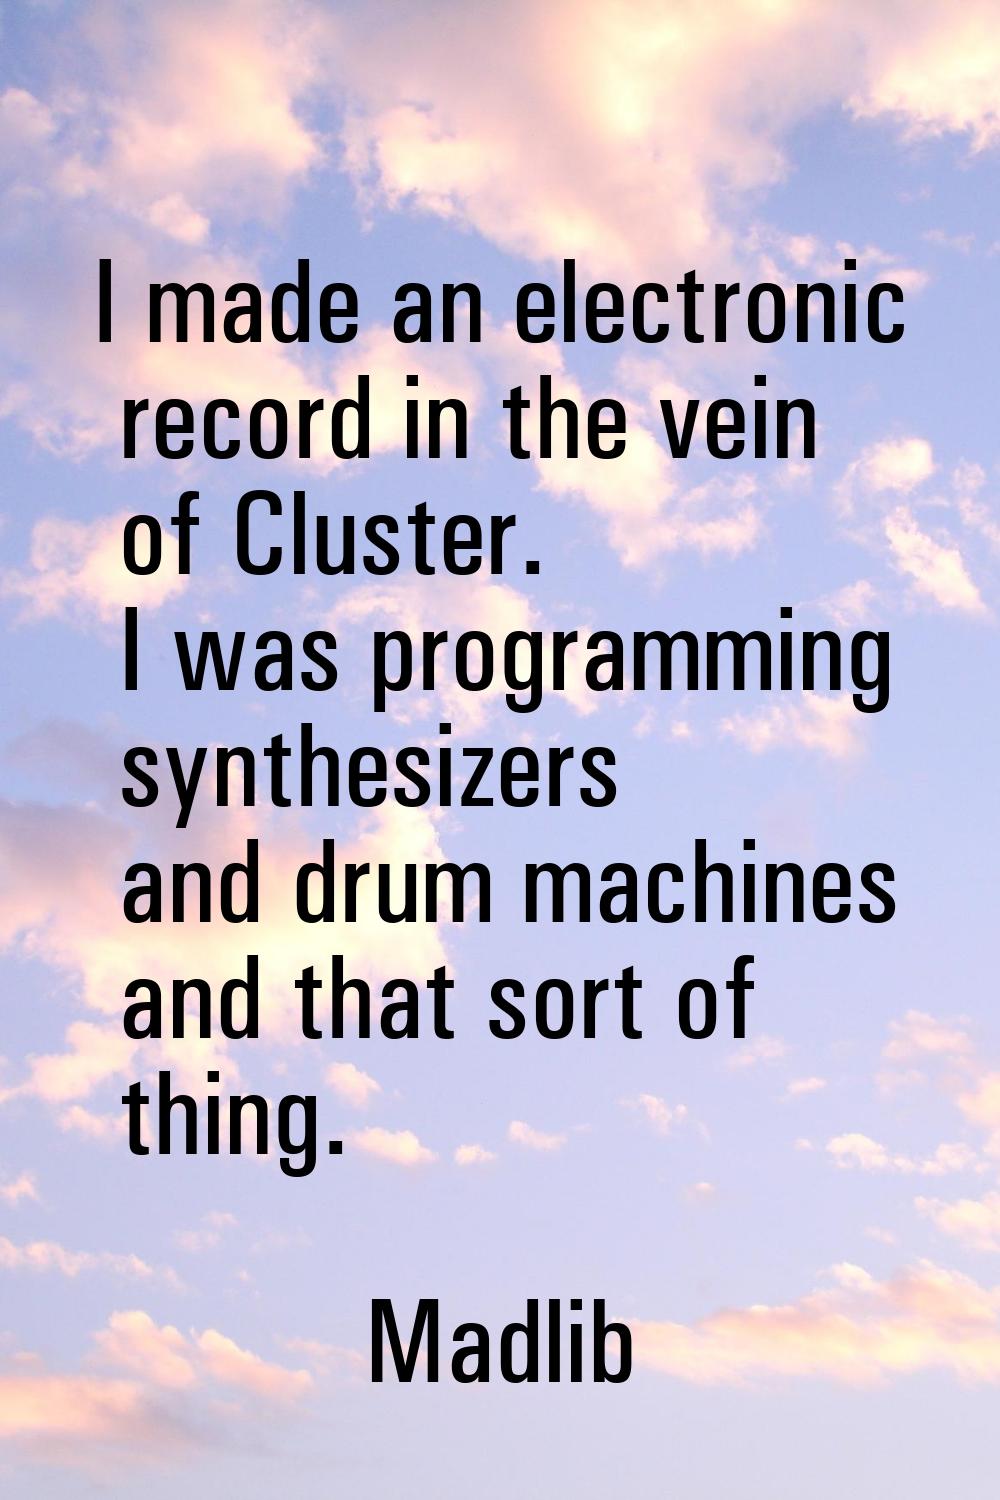 I made an electronic record in the vein of Cluster. I was programming synthesizers and drum machine